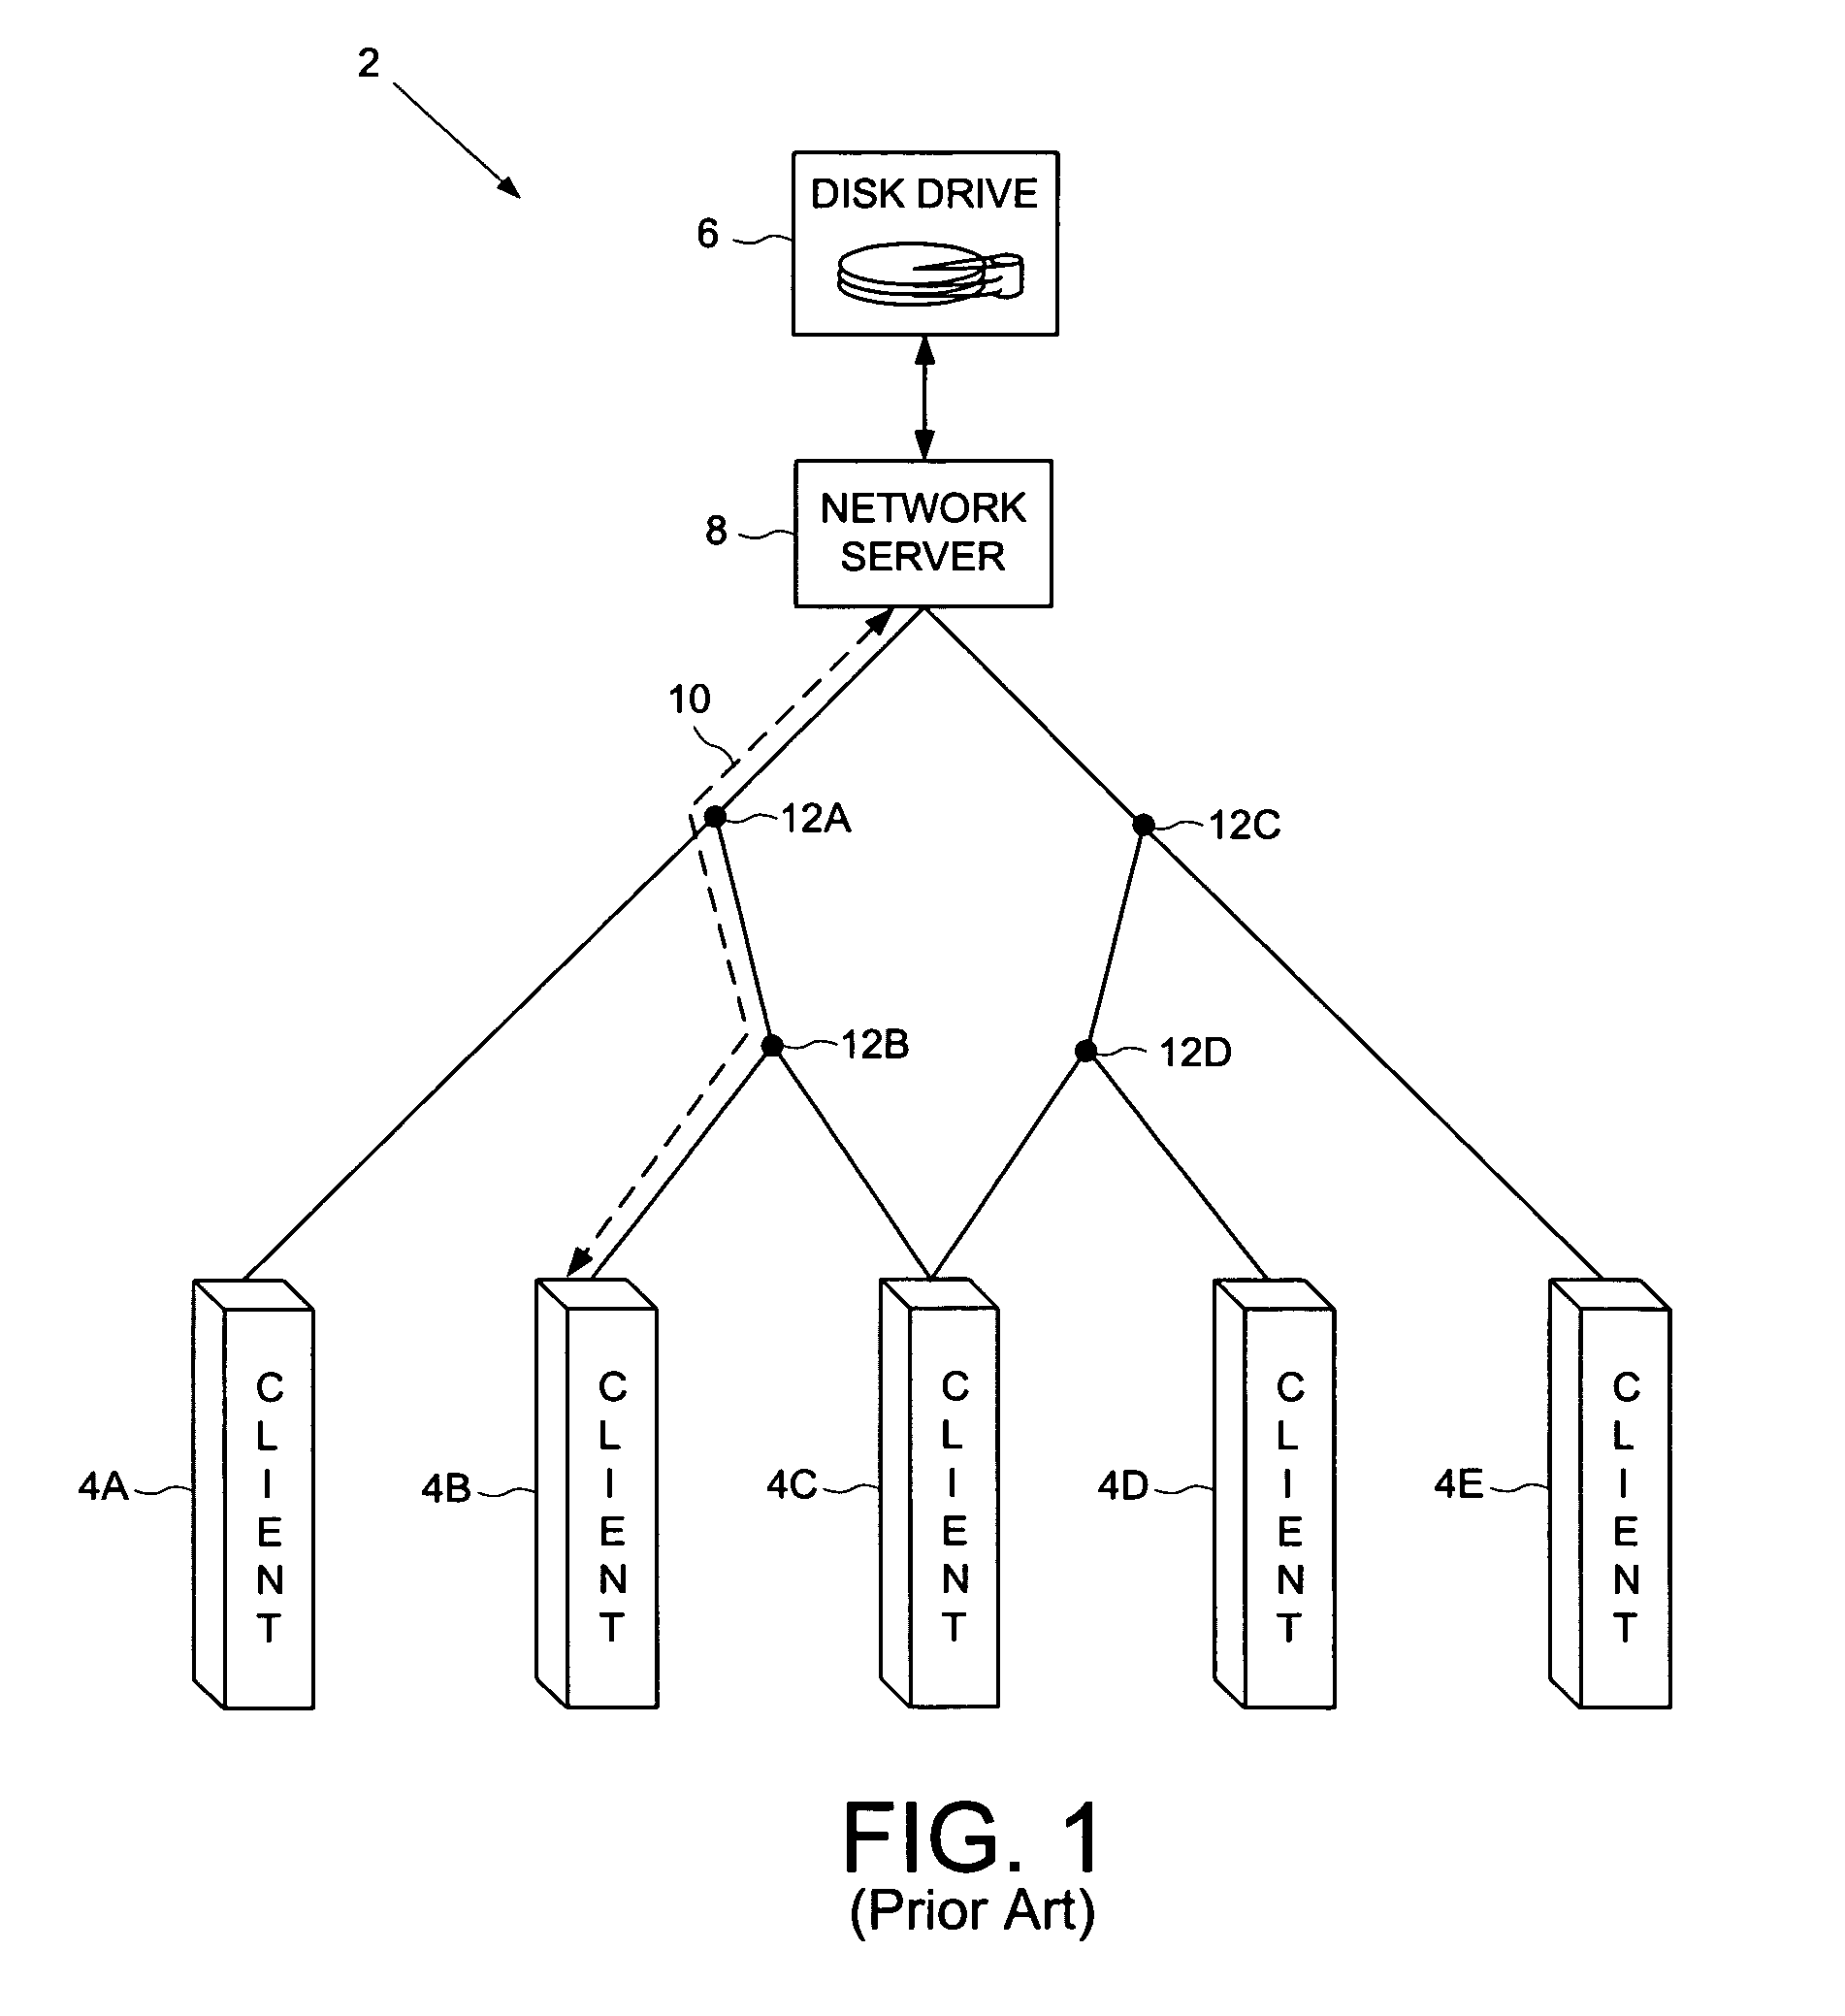 Resource reservation system in a computer network to support end-to-end quality-of-service constraints